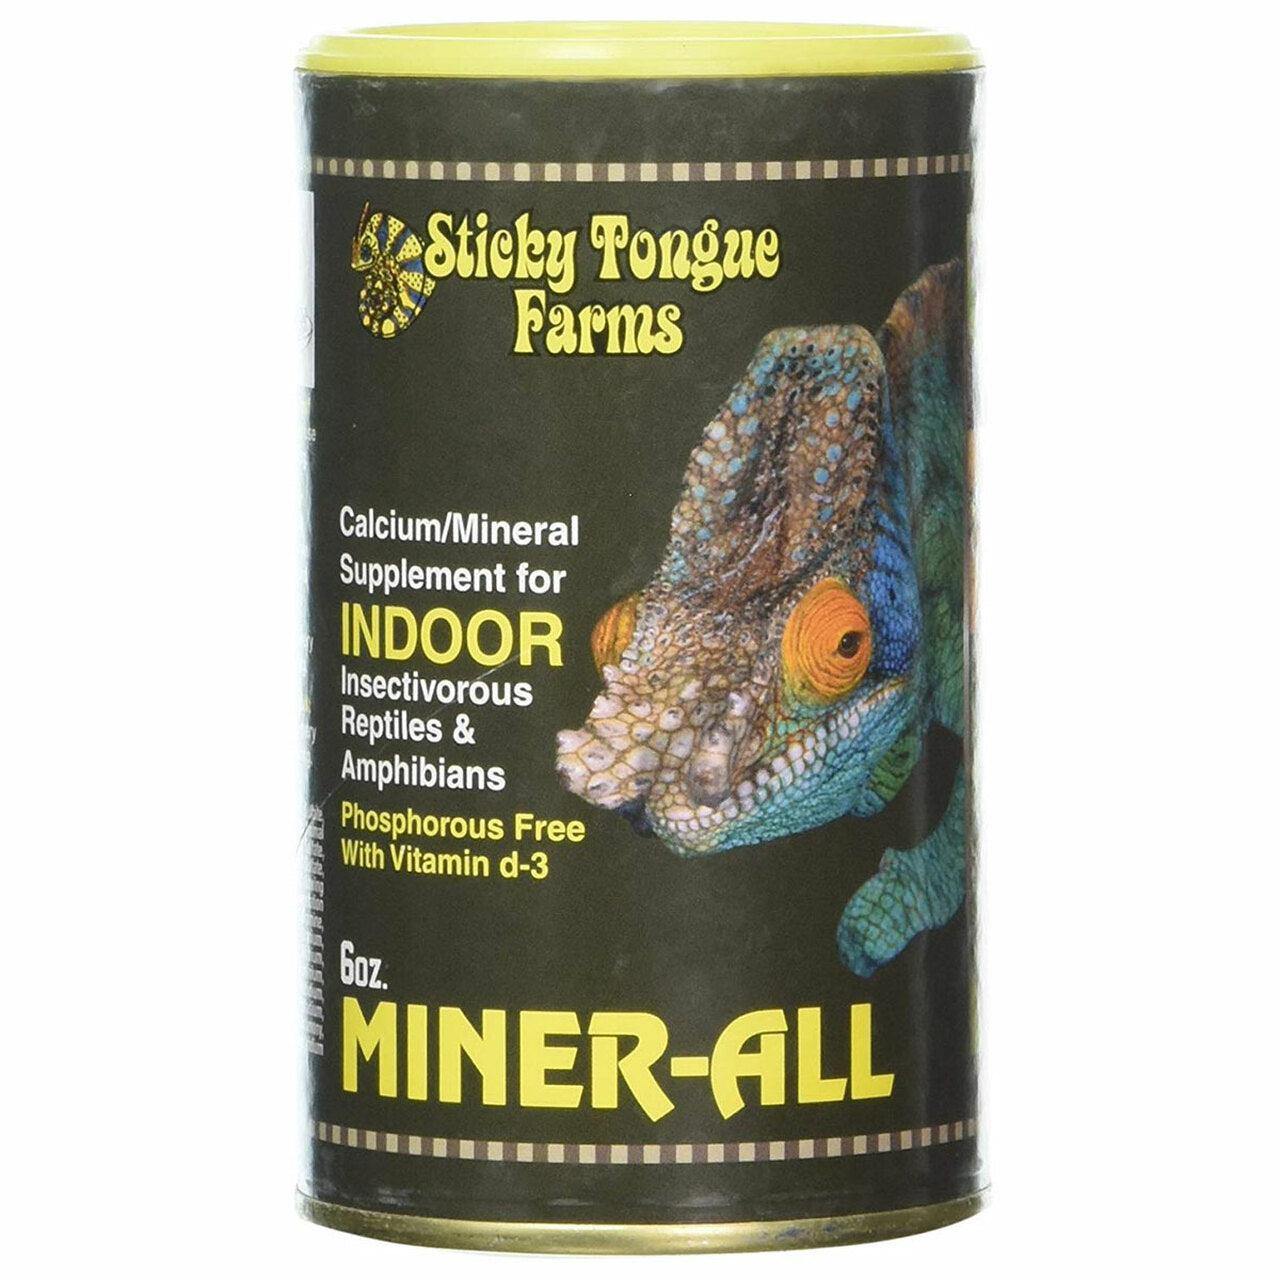 Sticky Tongue Farms Miner-all Indoor 6oz (170g) Can